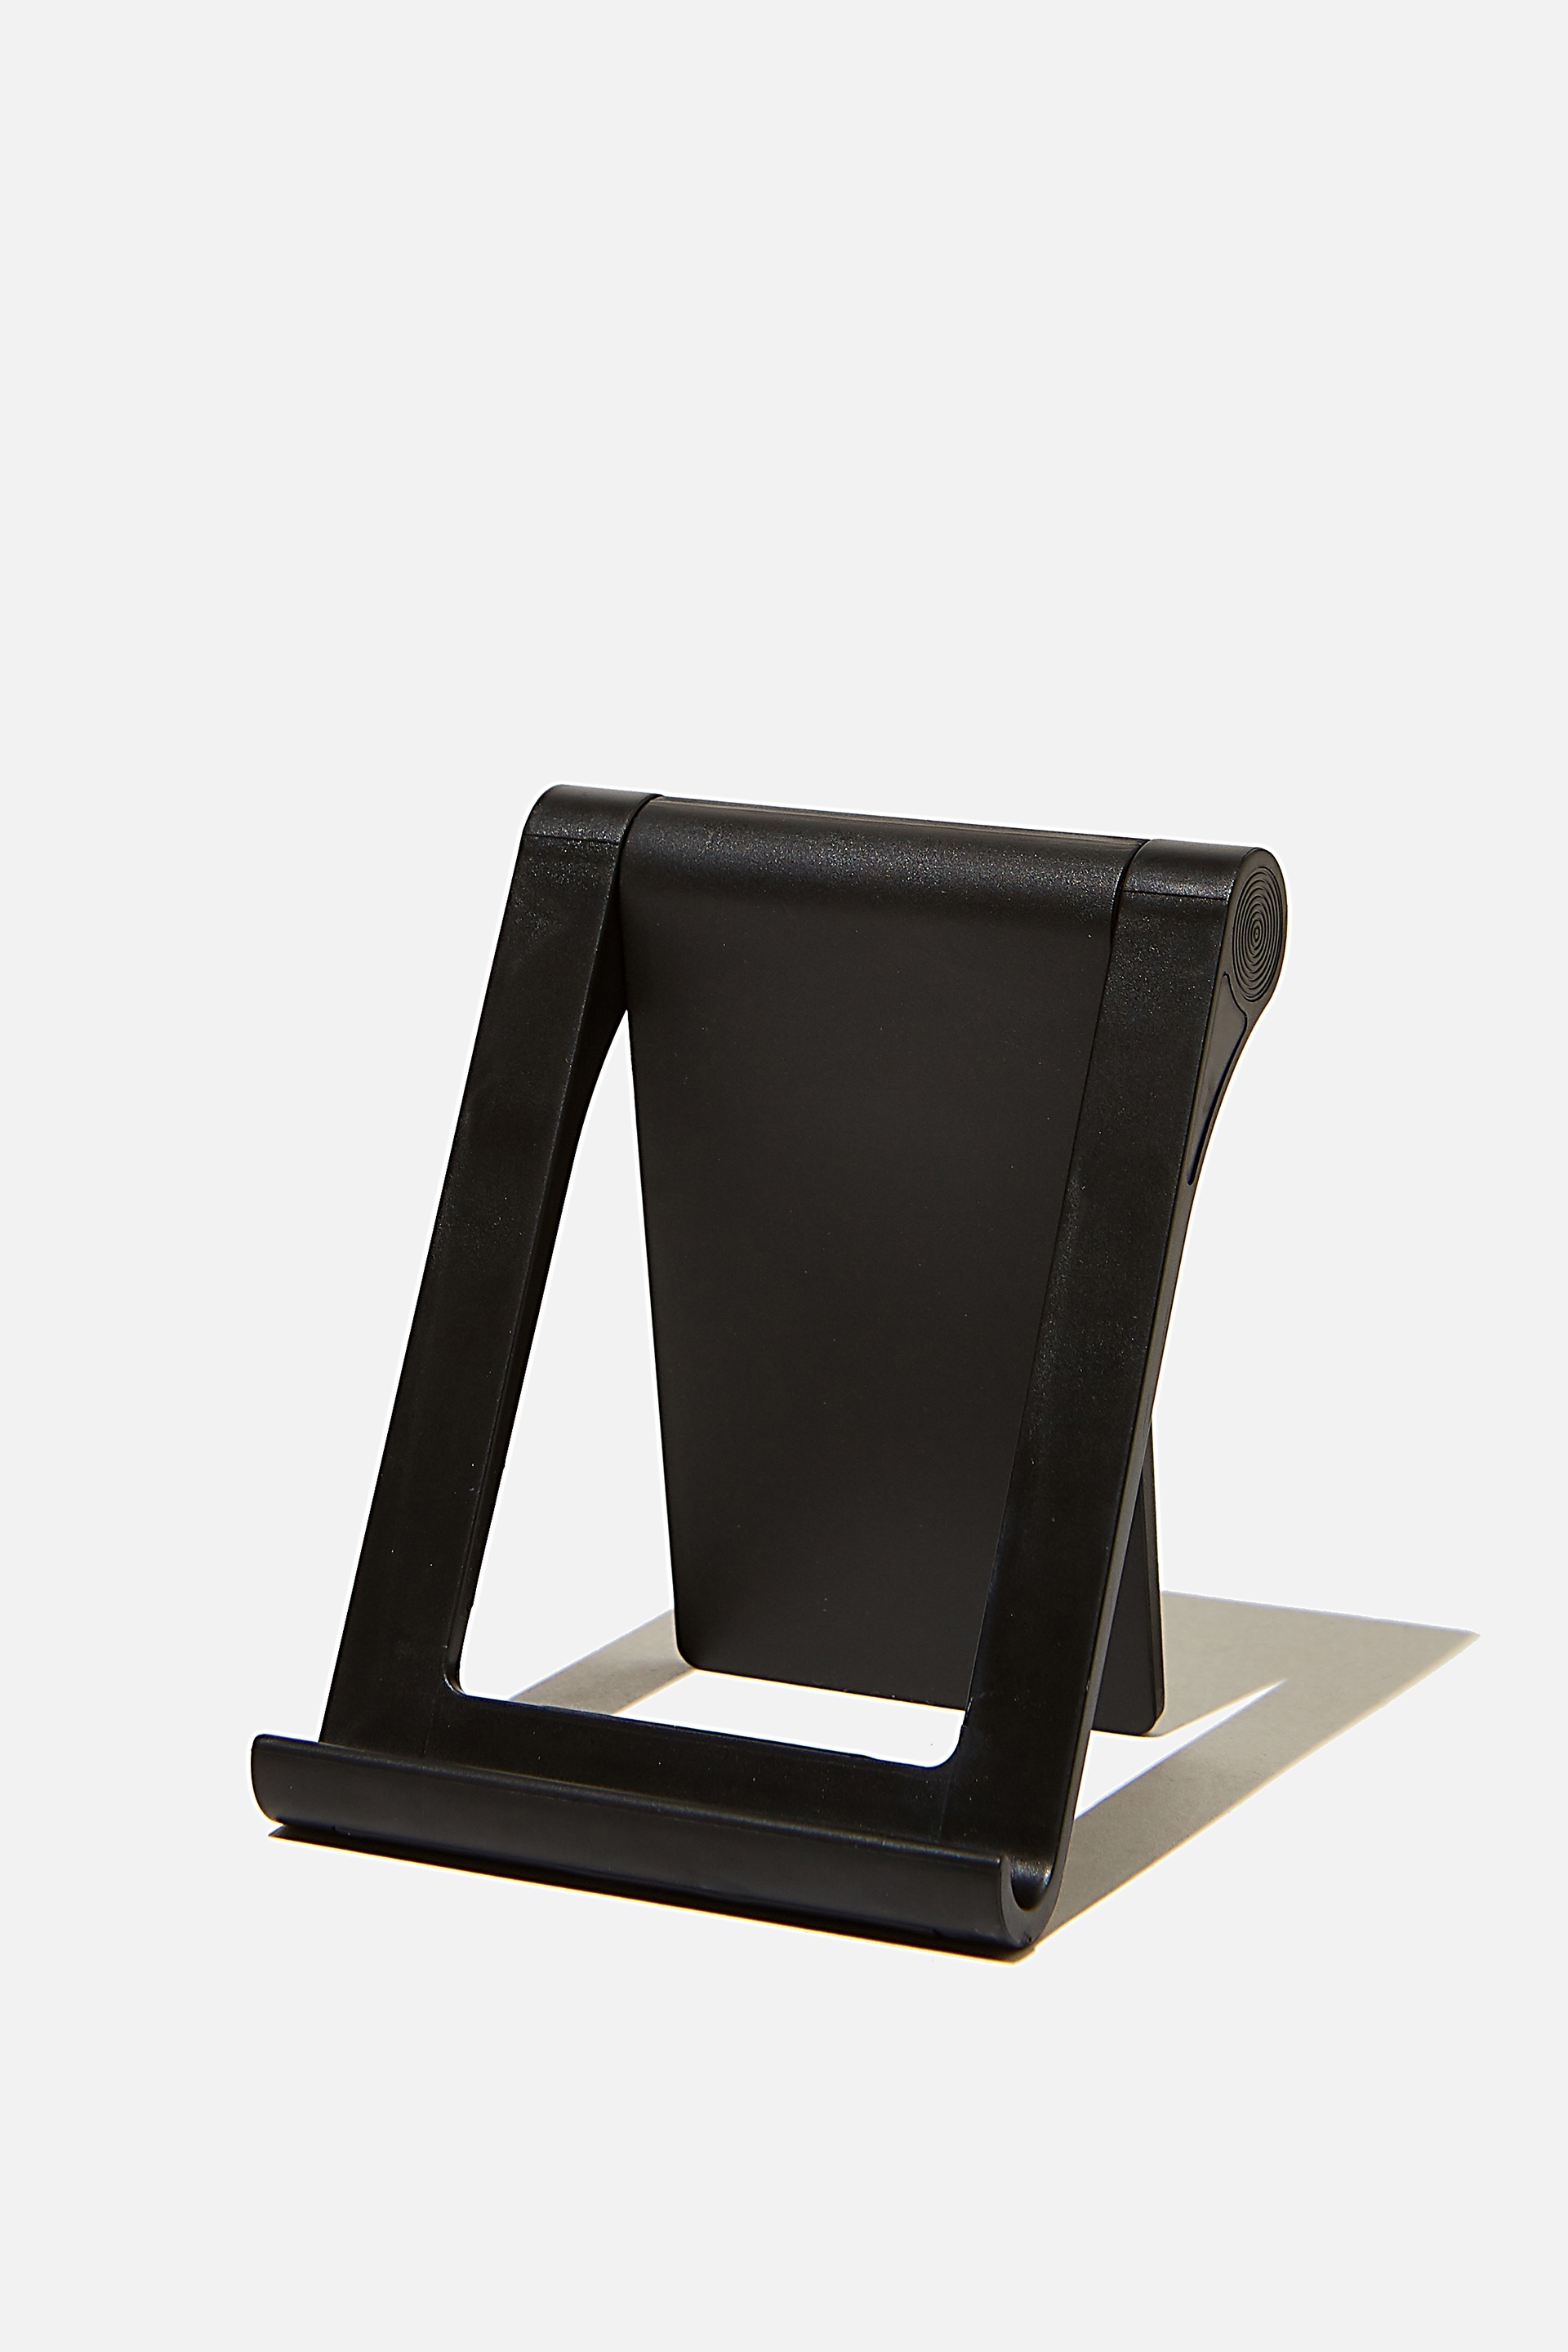 Typo - Collapsible Phone Stand - Black